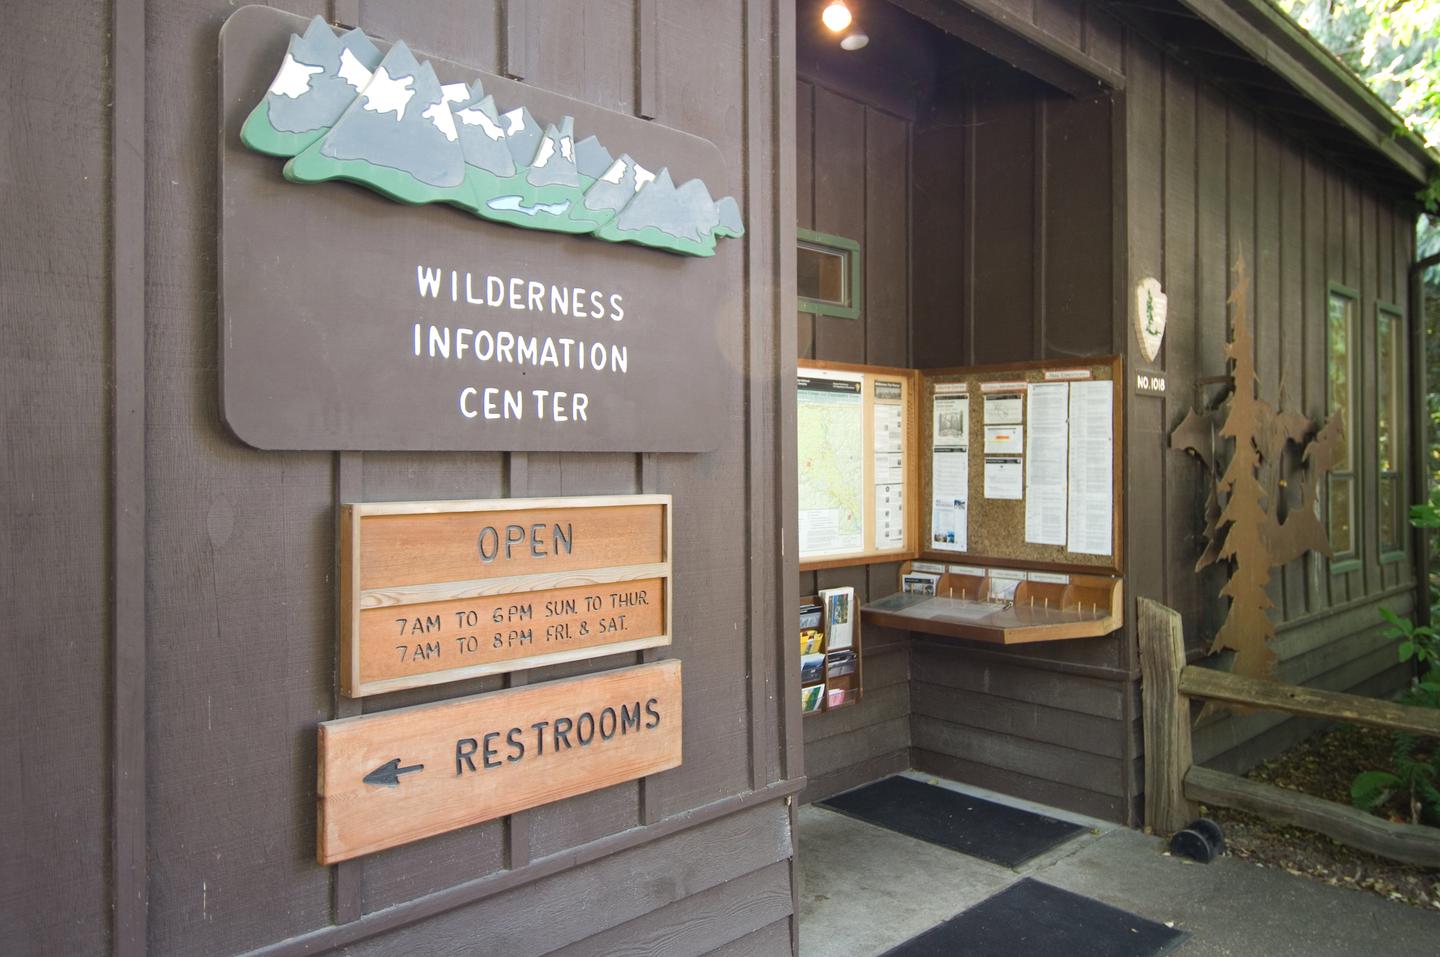 Preview photo of Wilderness Information Center